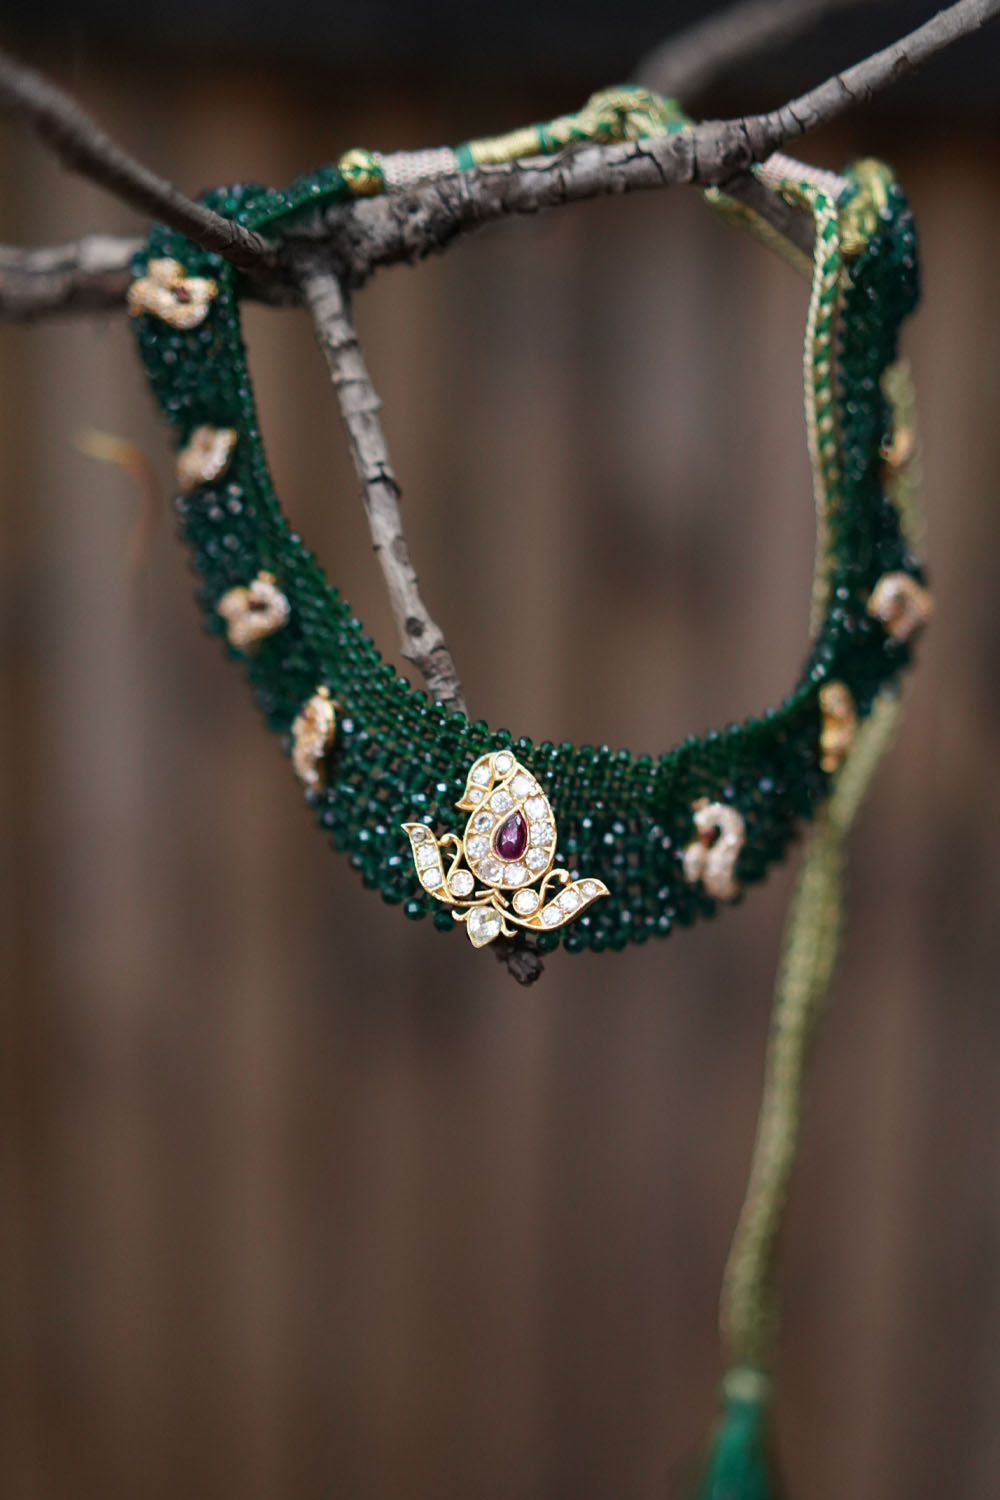 Green crystal beadwork necklace with stones on gold filigree - House of Blouse